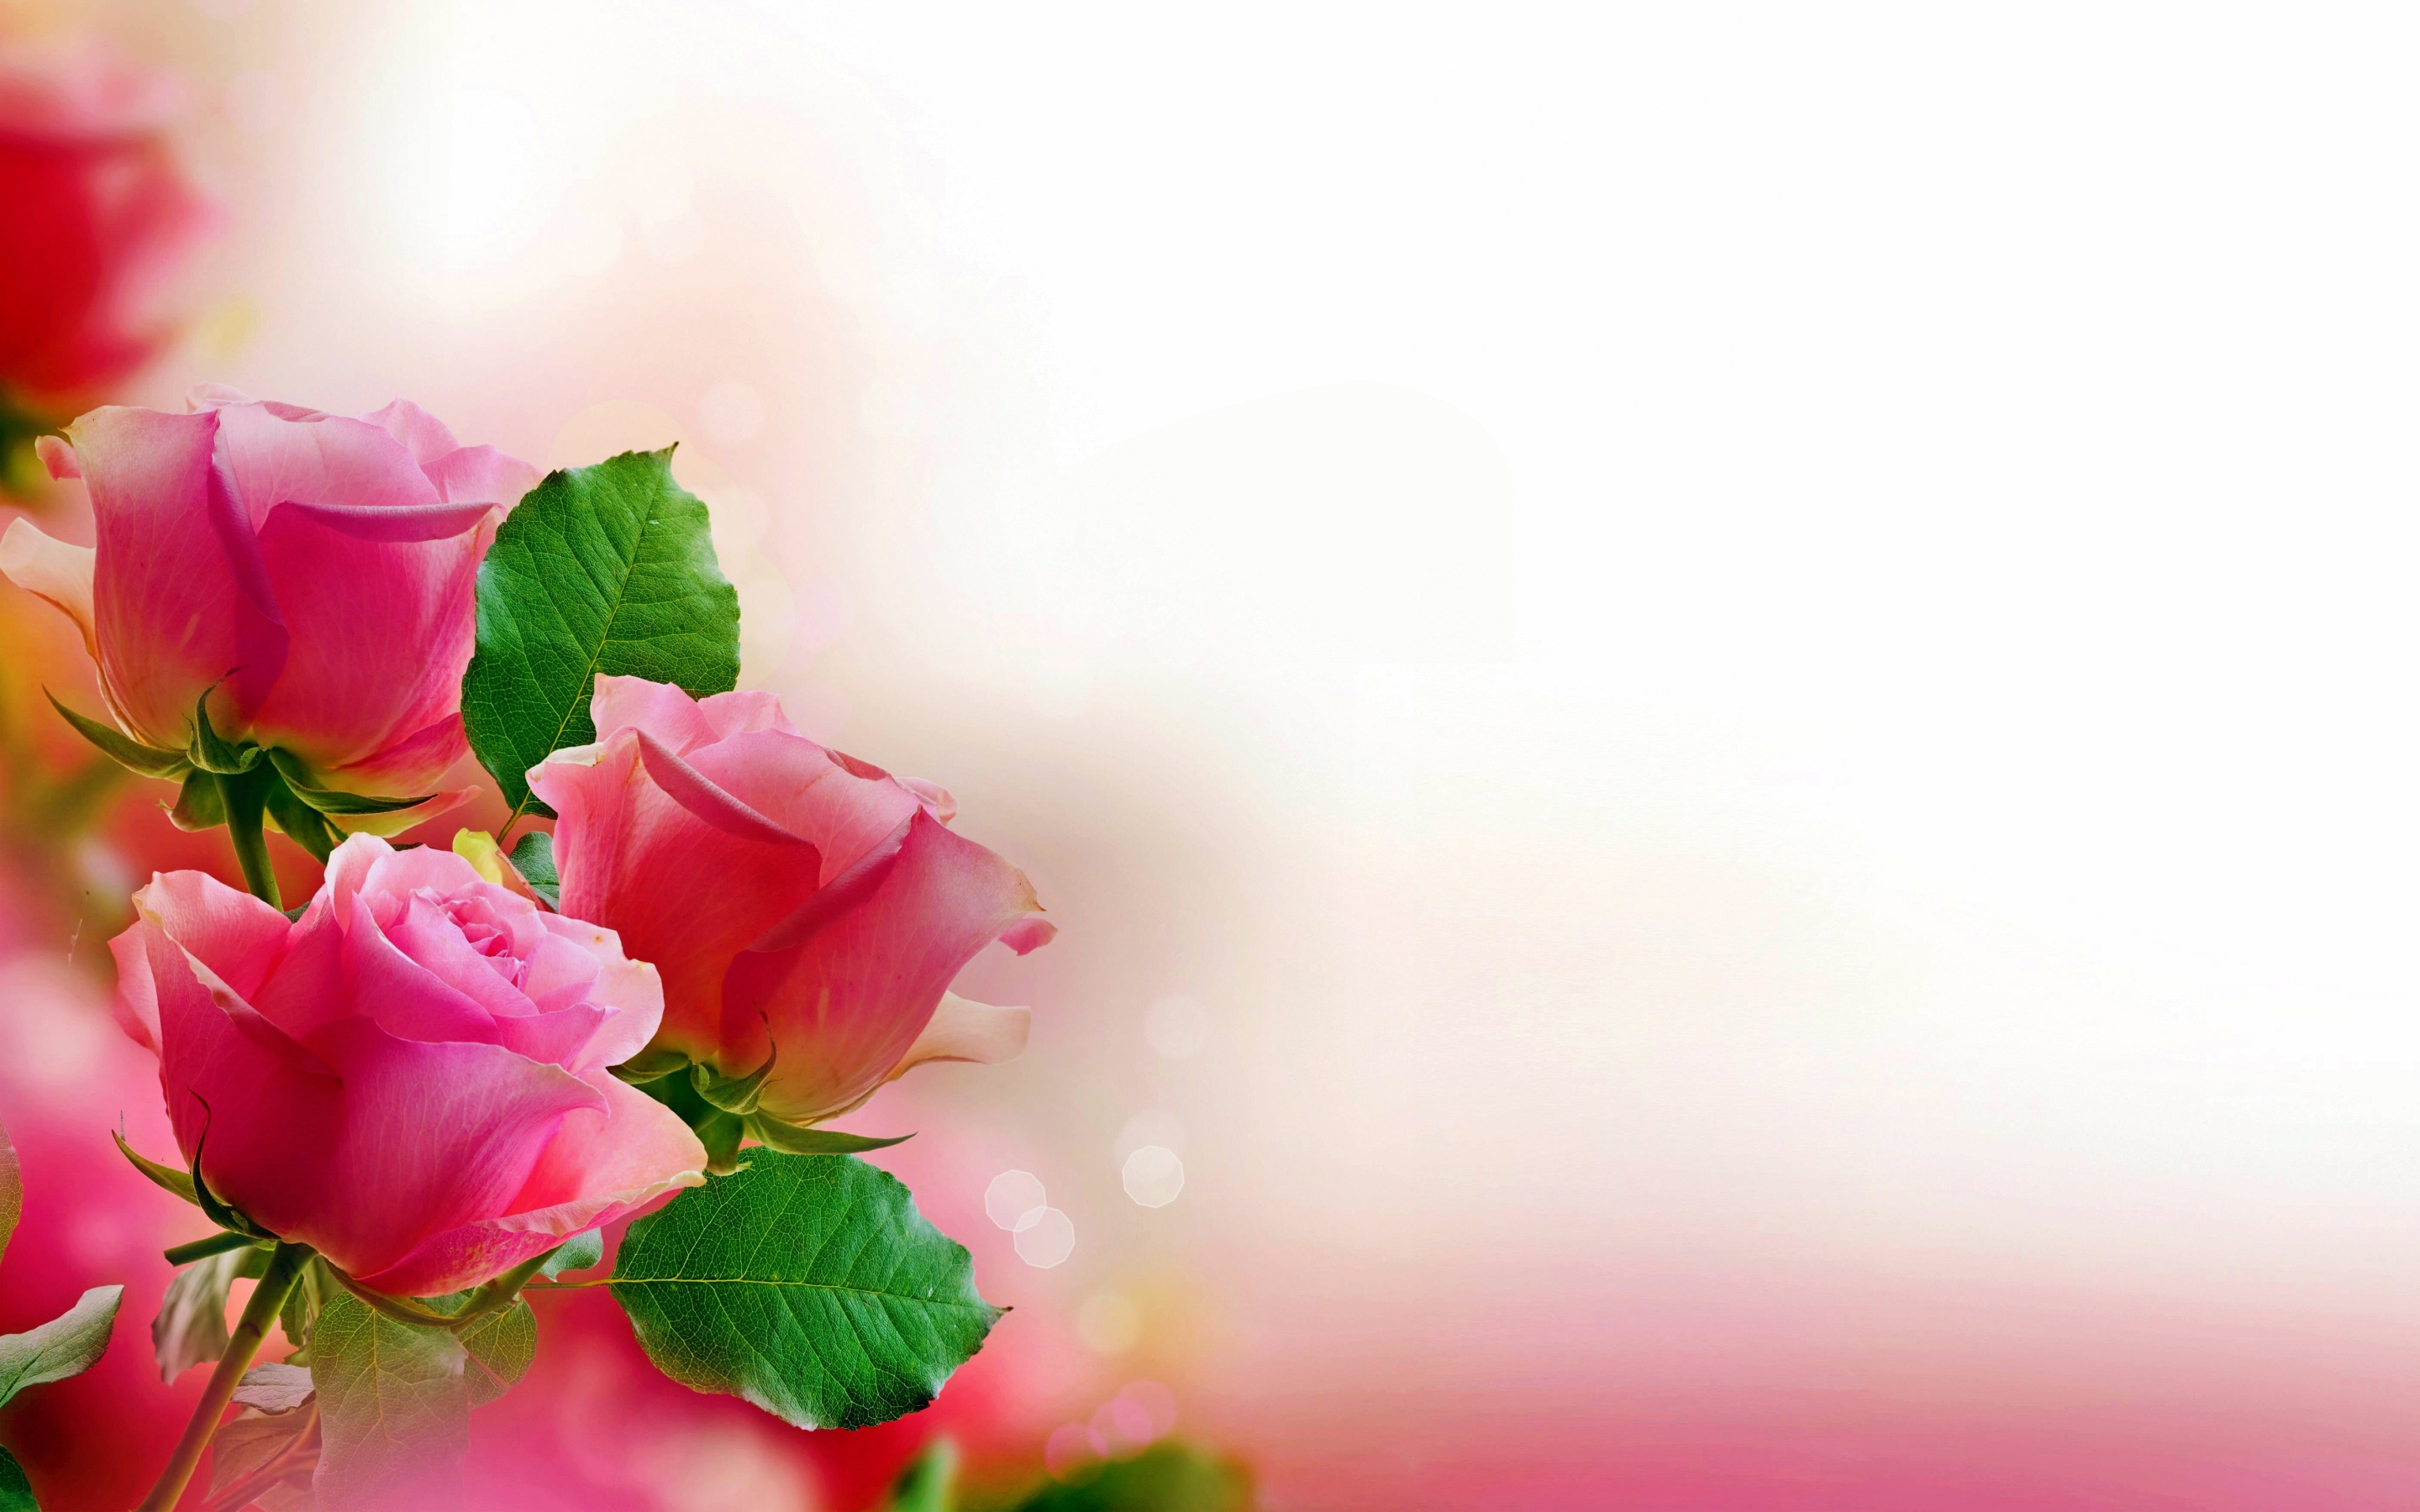 Pink Roses for 2880 x 1800 Retina Display resolution